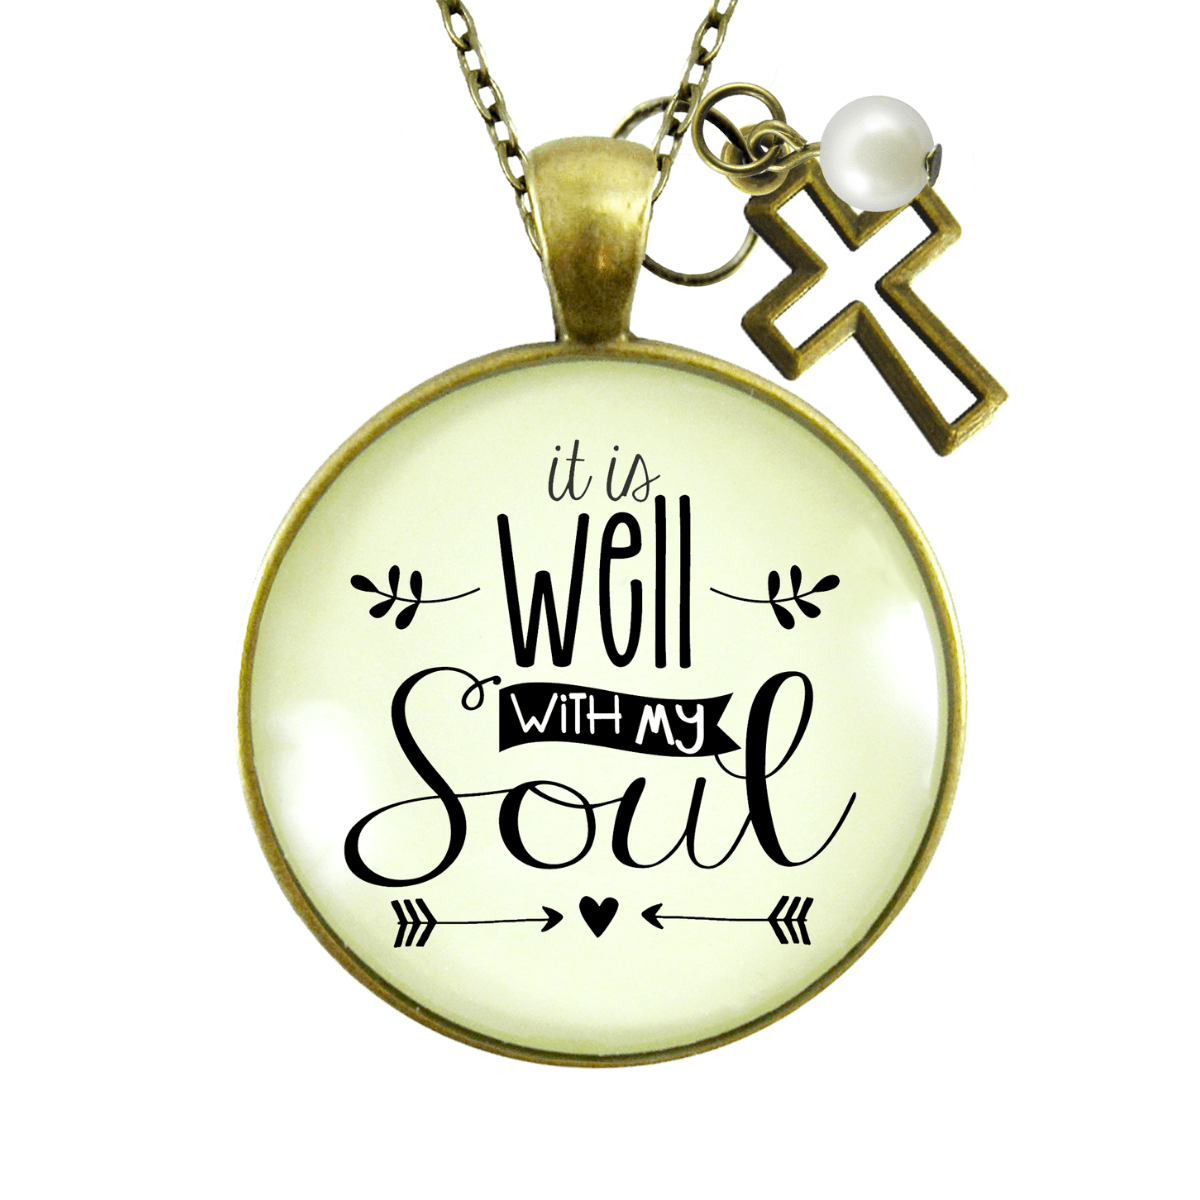 Gutsy Goodness Inspirational Faith Necklace It is Well with My Soul Hymn Jewelry - Gutsy Goodness Handmade Jewelry;Inspirational Faith Necklace It Is Well With My Soul Hymn Jewelry - Gutsy Goodness Handmade Jewelry Gifts